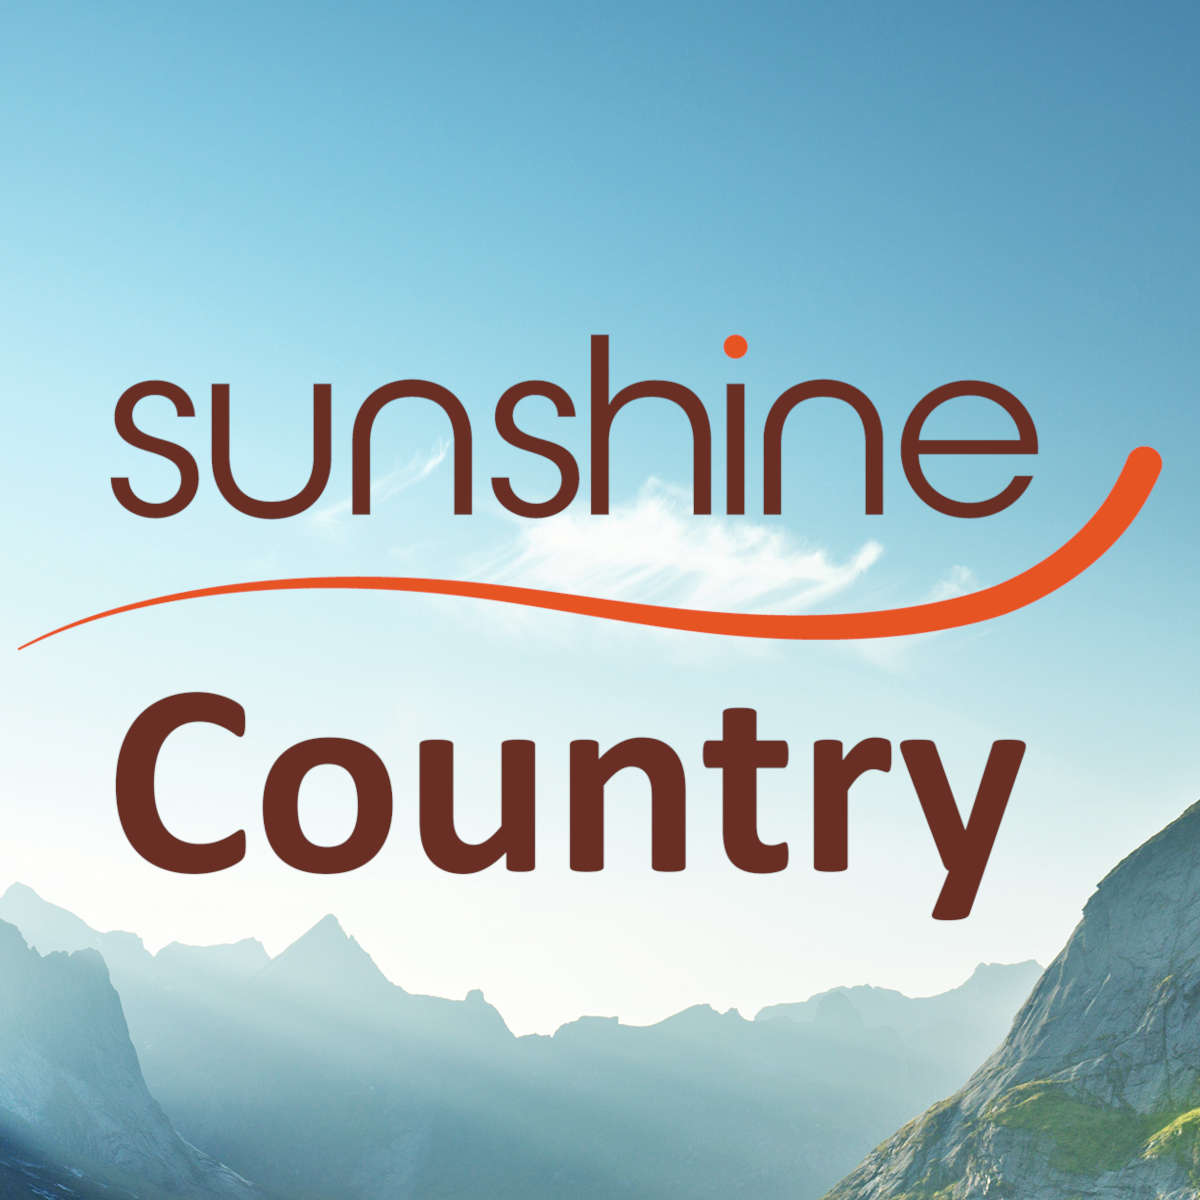 This Is Sunshine Country by Sunshinecountry on Sunshine Country